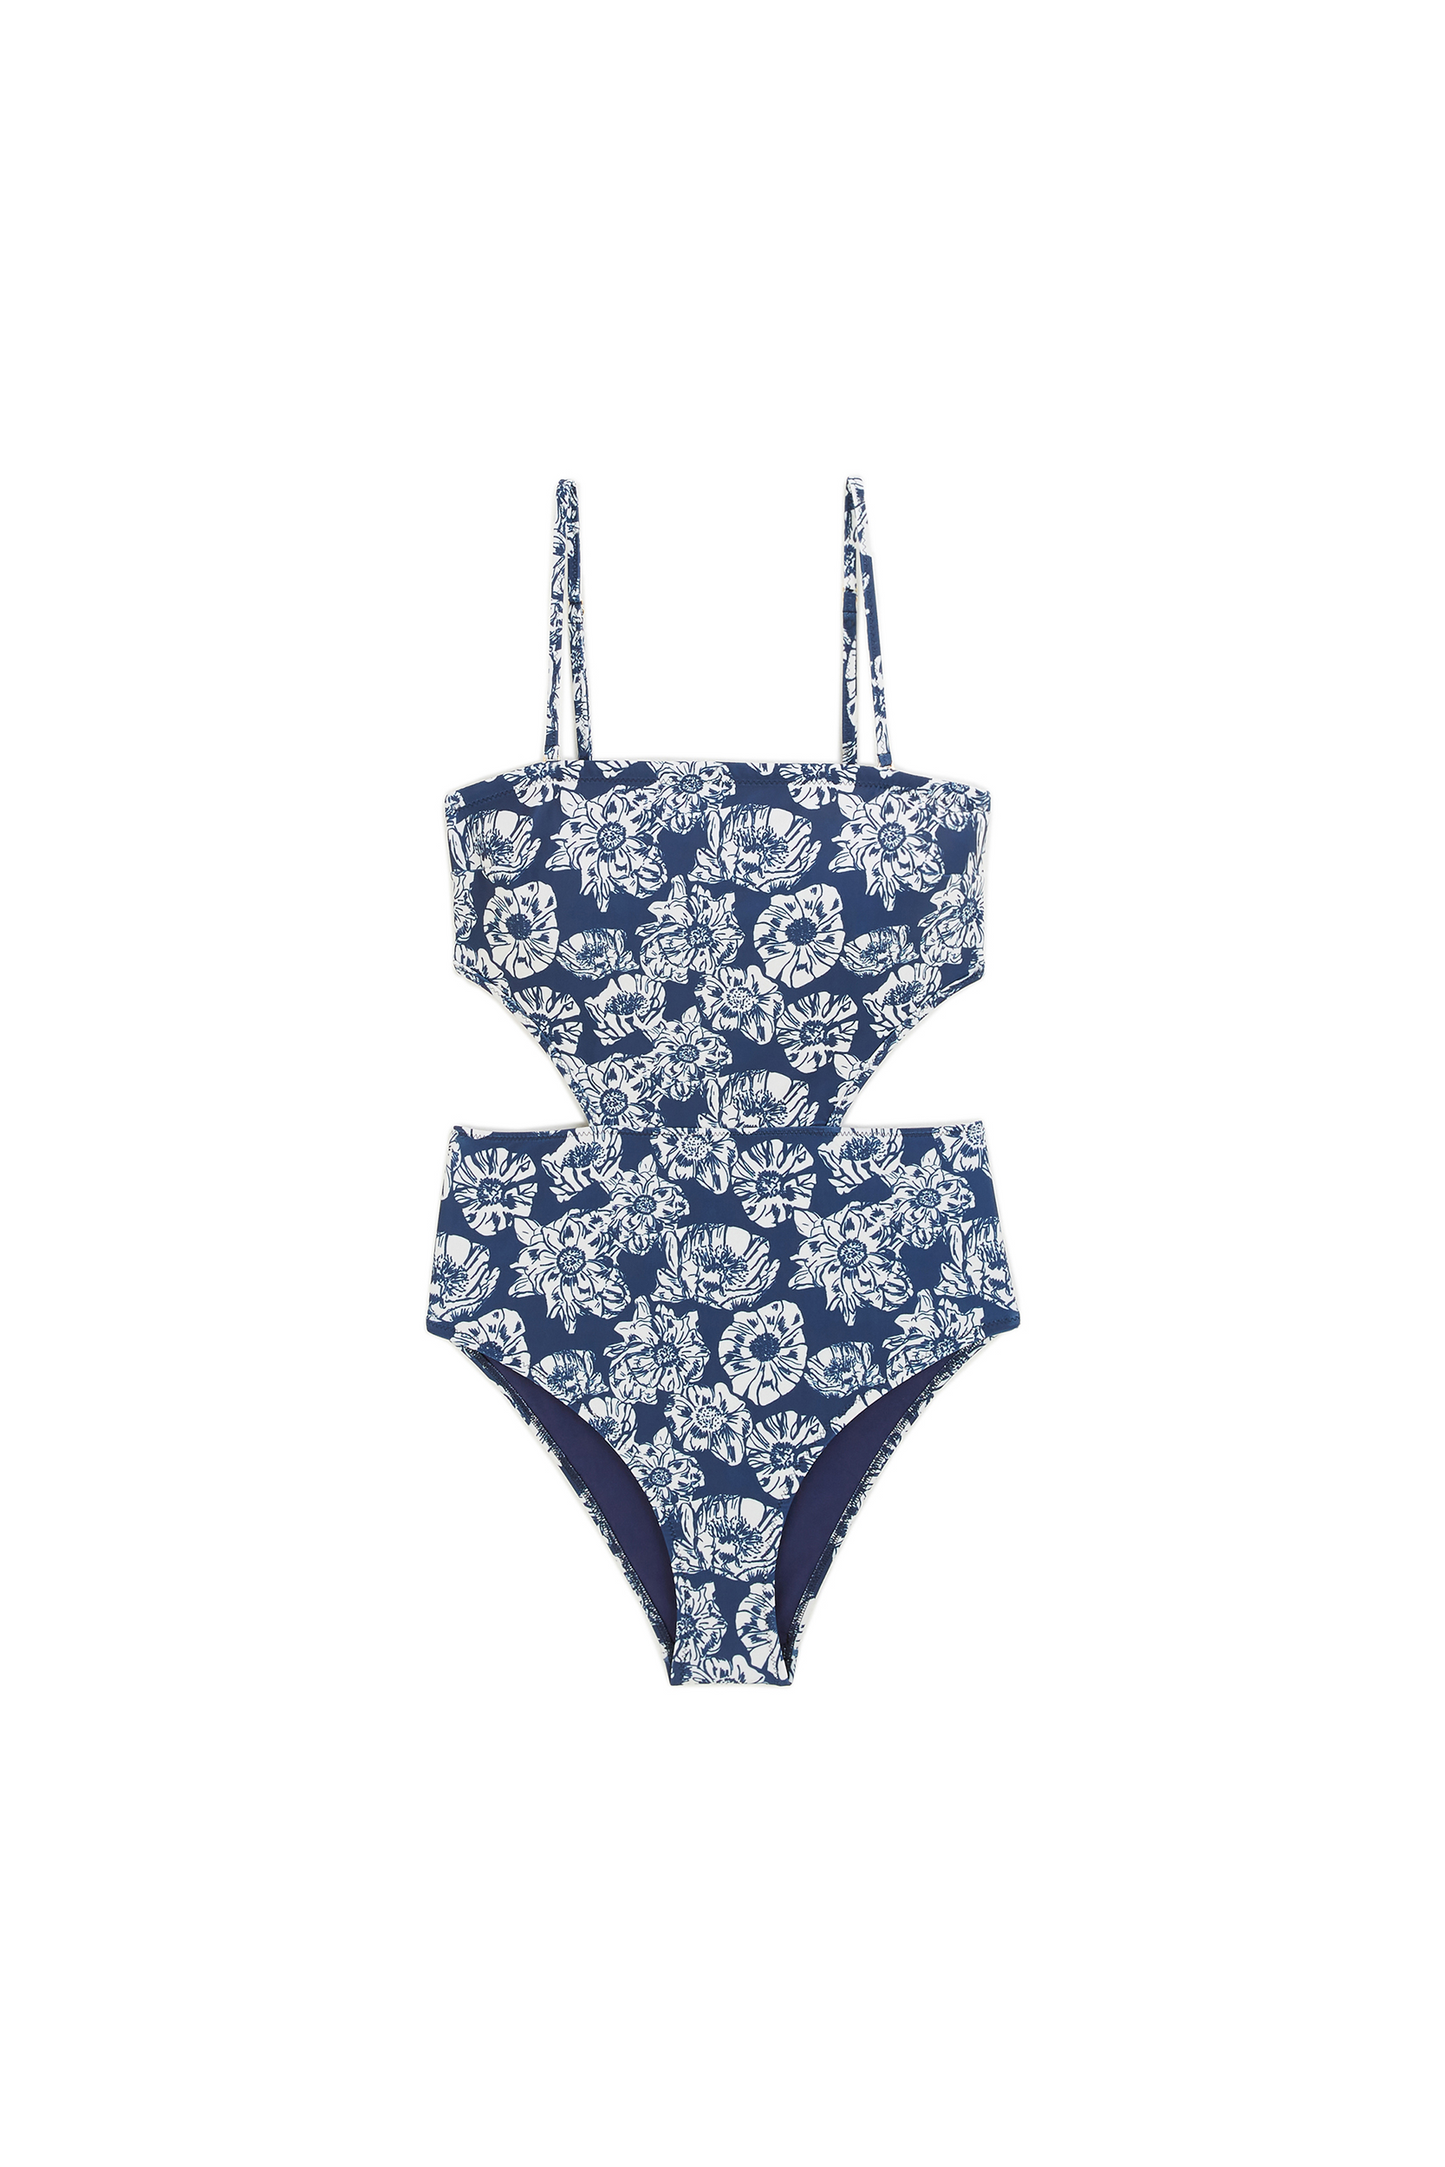 Ariane swimsuit with navy and ecru flower party print